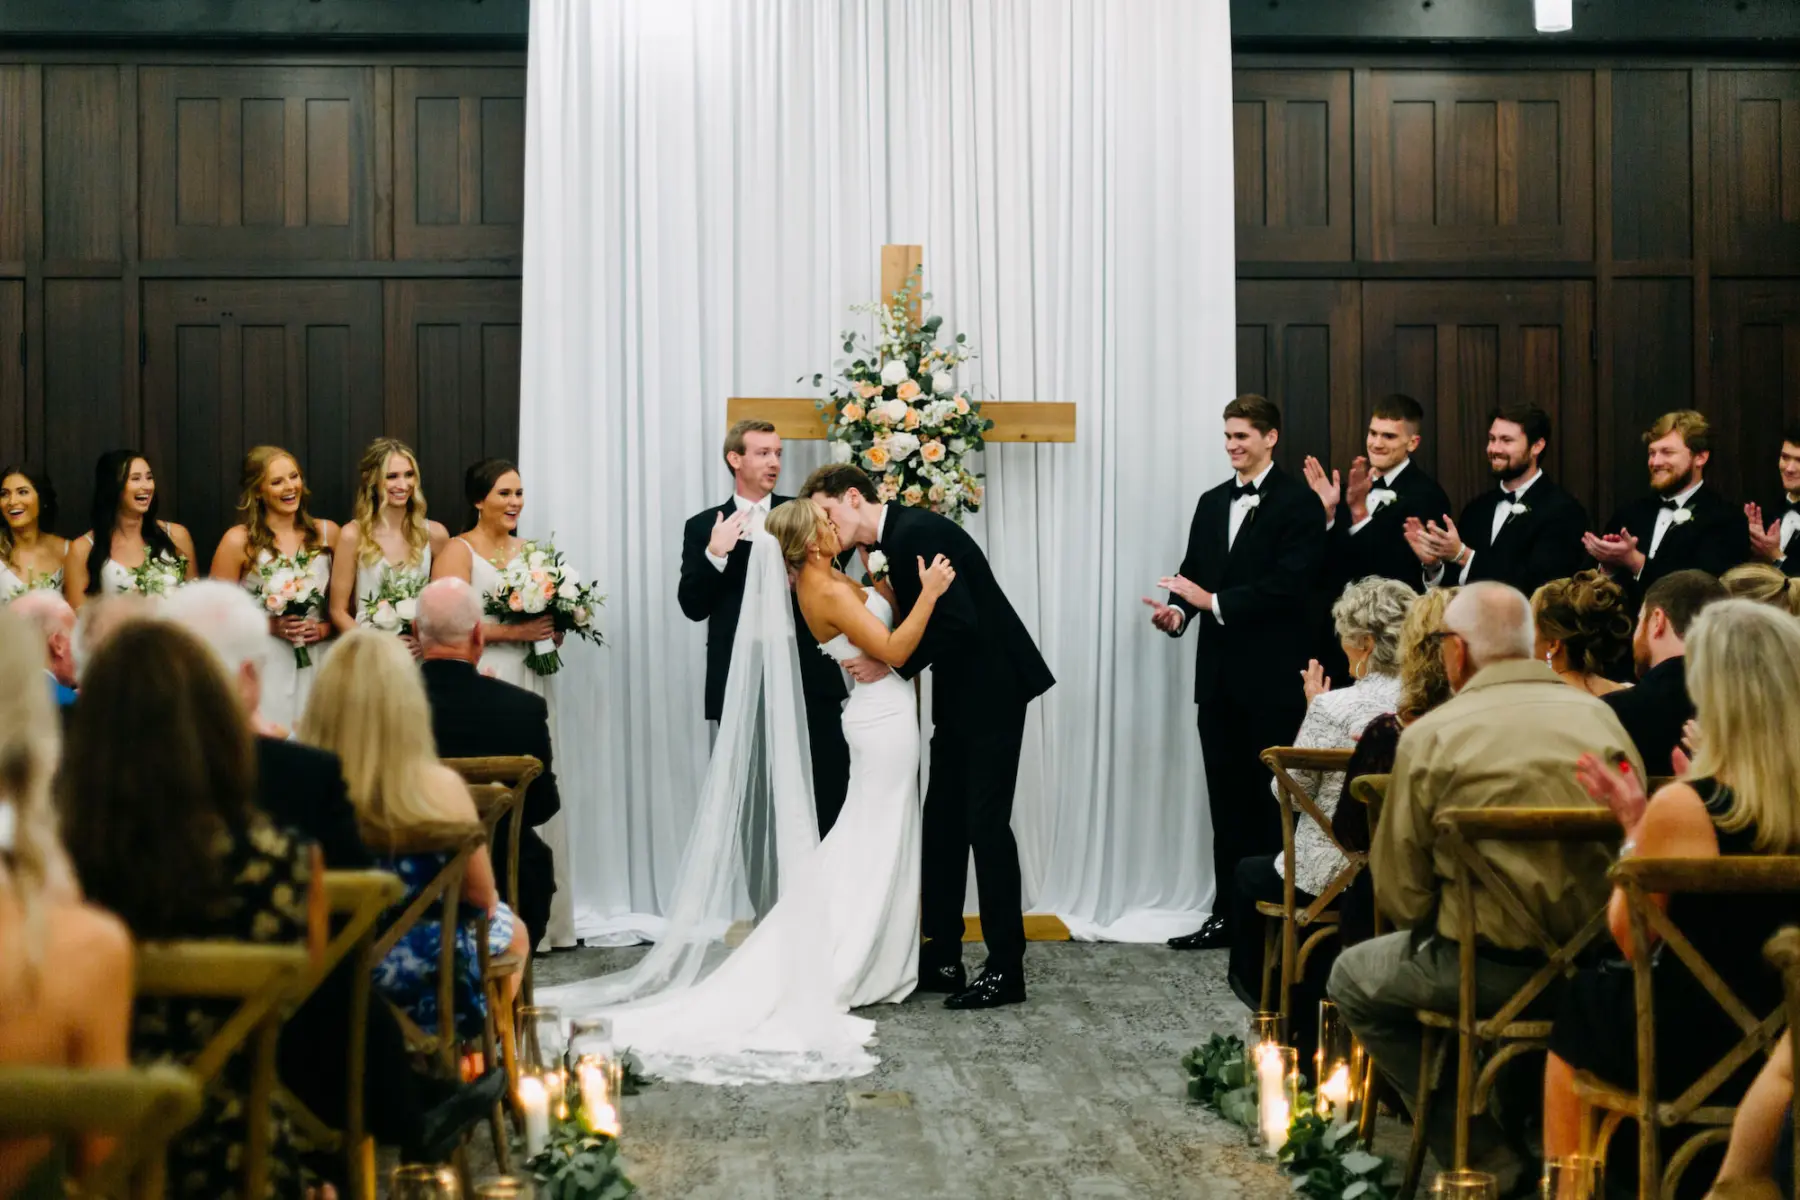 Classic White and Greenery Wedding Ceremony Floral Inspiration with Cross at Altar | Tampa Florist Save the Date Florida | Venue Armature Works | Amber McWhorter Photography